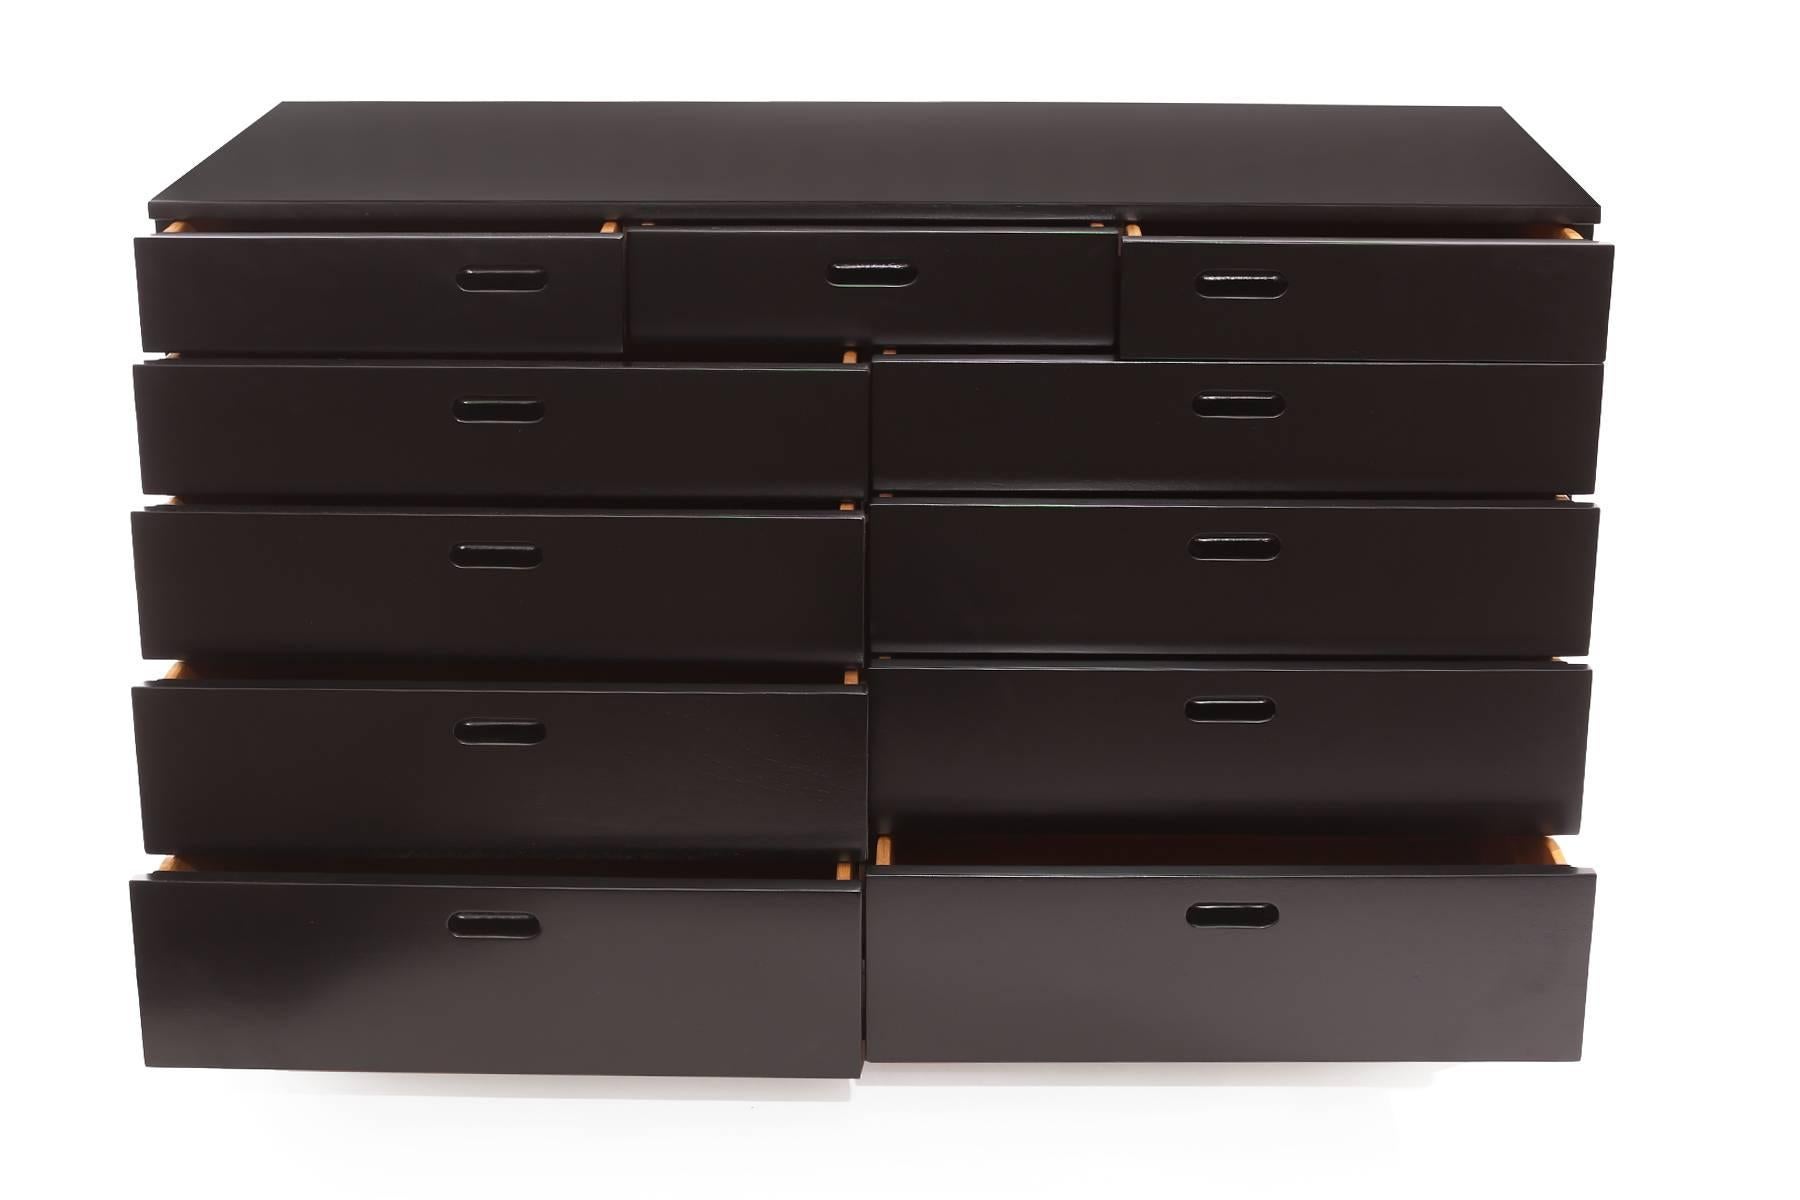 Edward Wormley for Dunbar 11-drawer dresser, circa early 1950s. This example has the early green metal Dunbar label, inset drawer pulls and has recently and impeccably been lacquered black.